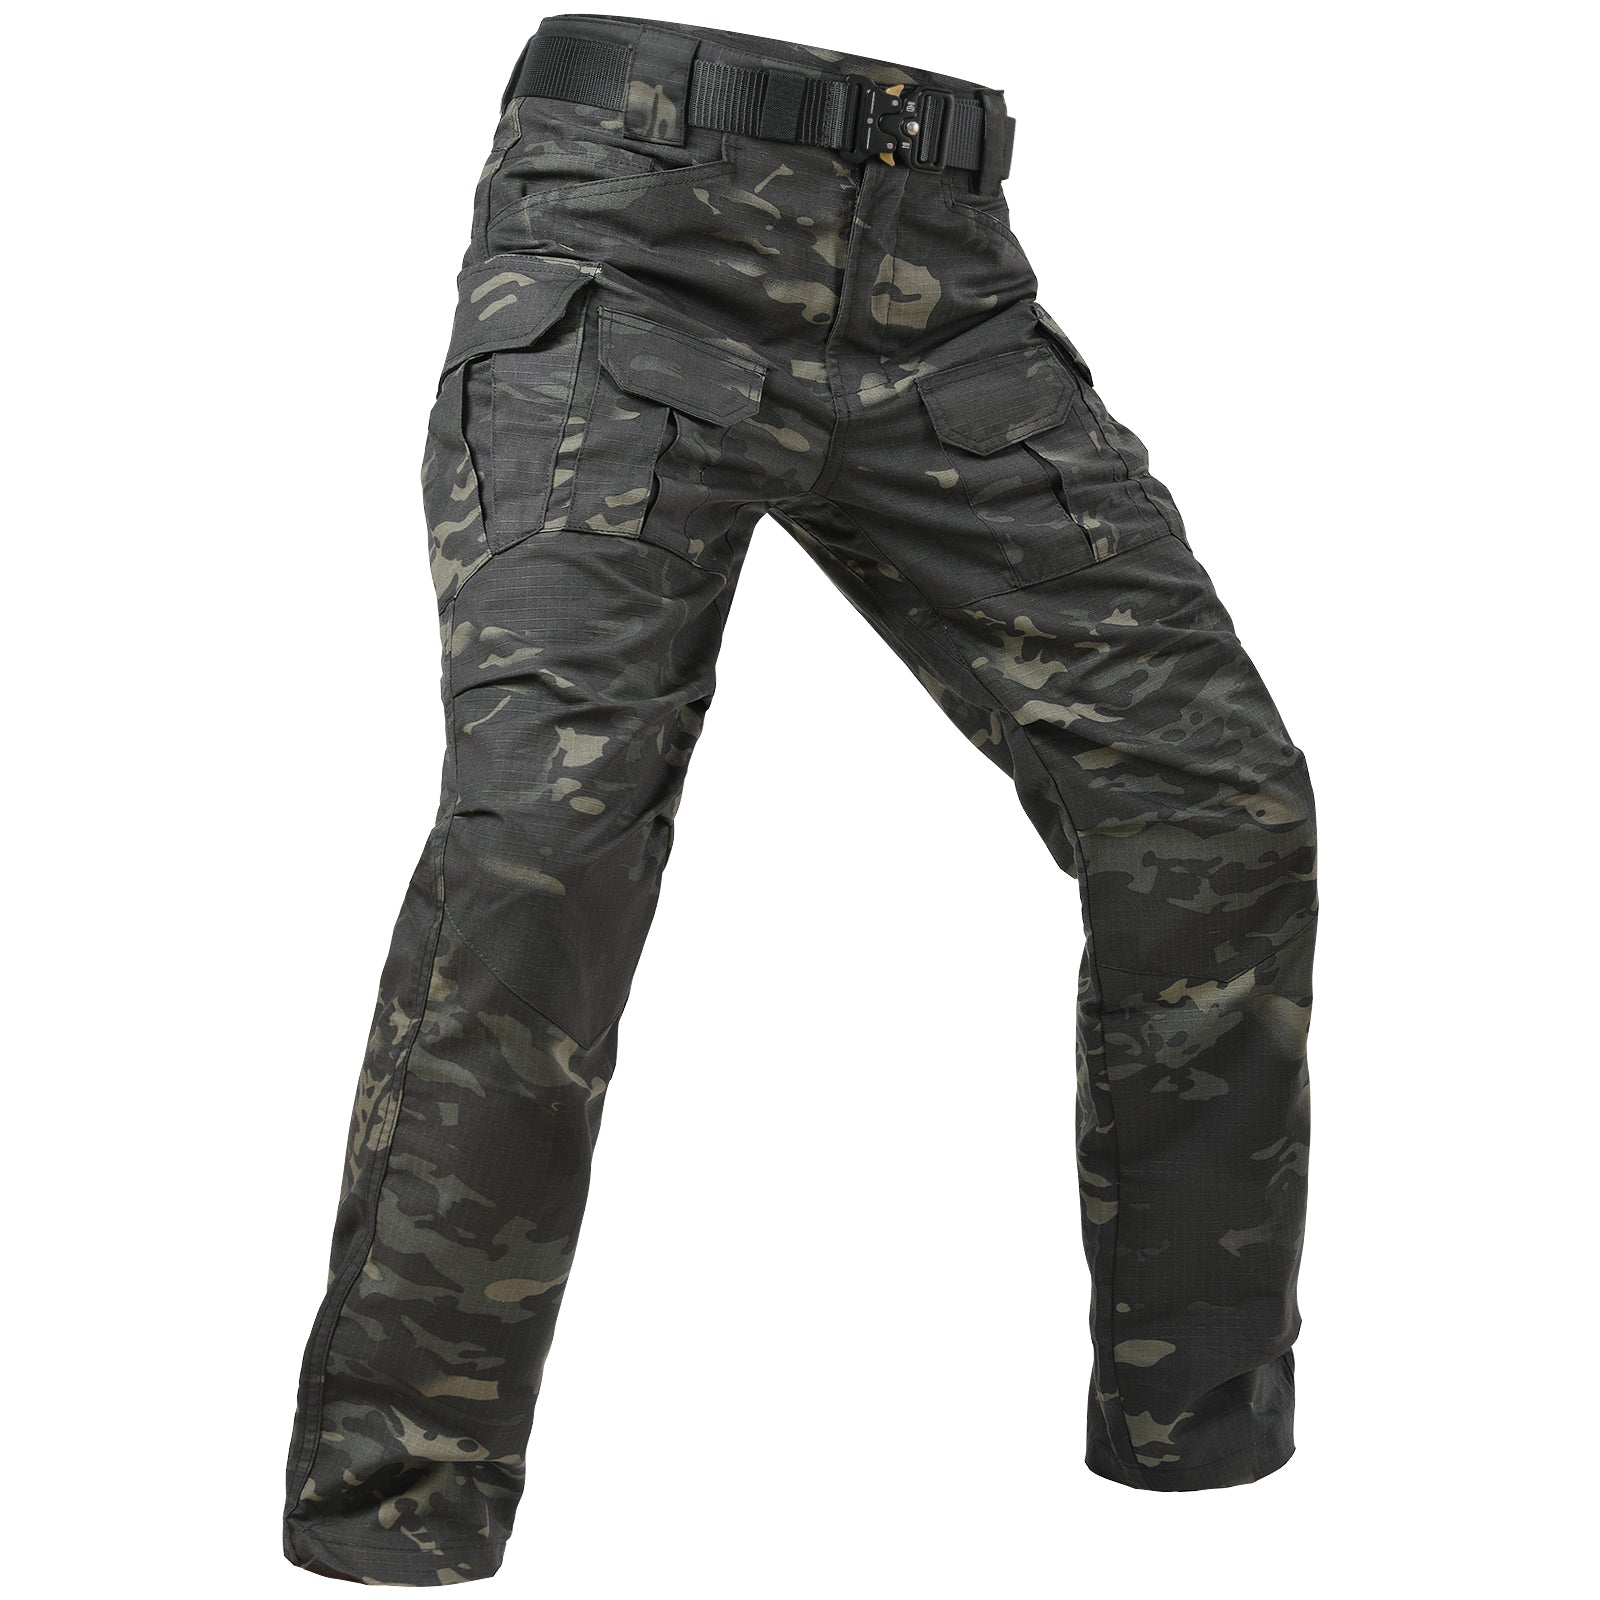 Archon IX8 Outdoor Waterproof Tactical Pants | Buy More Save More – TWS USA